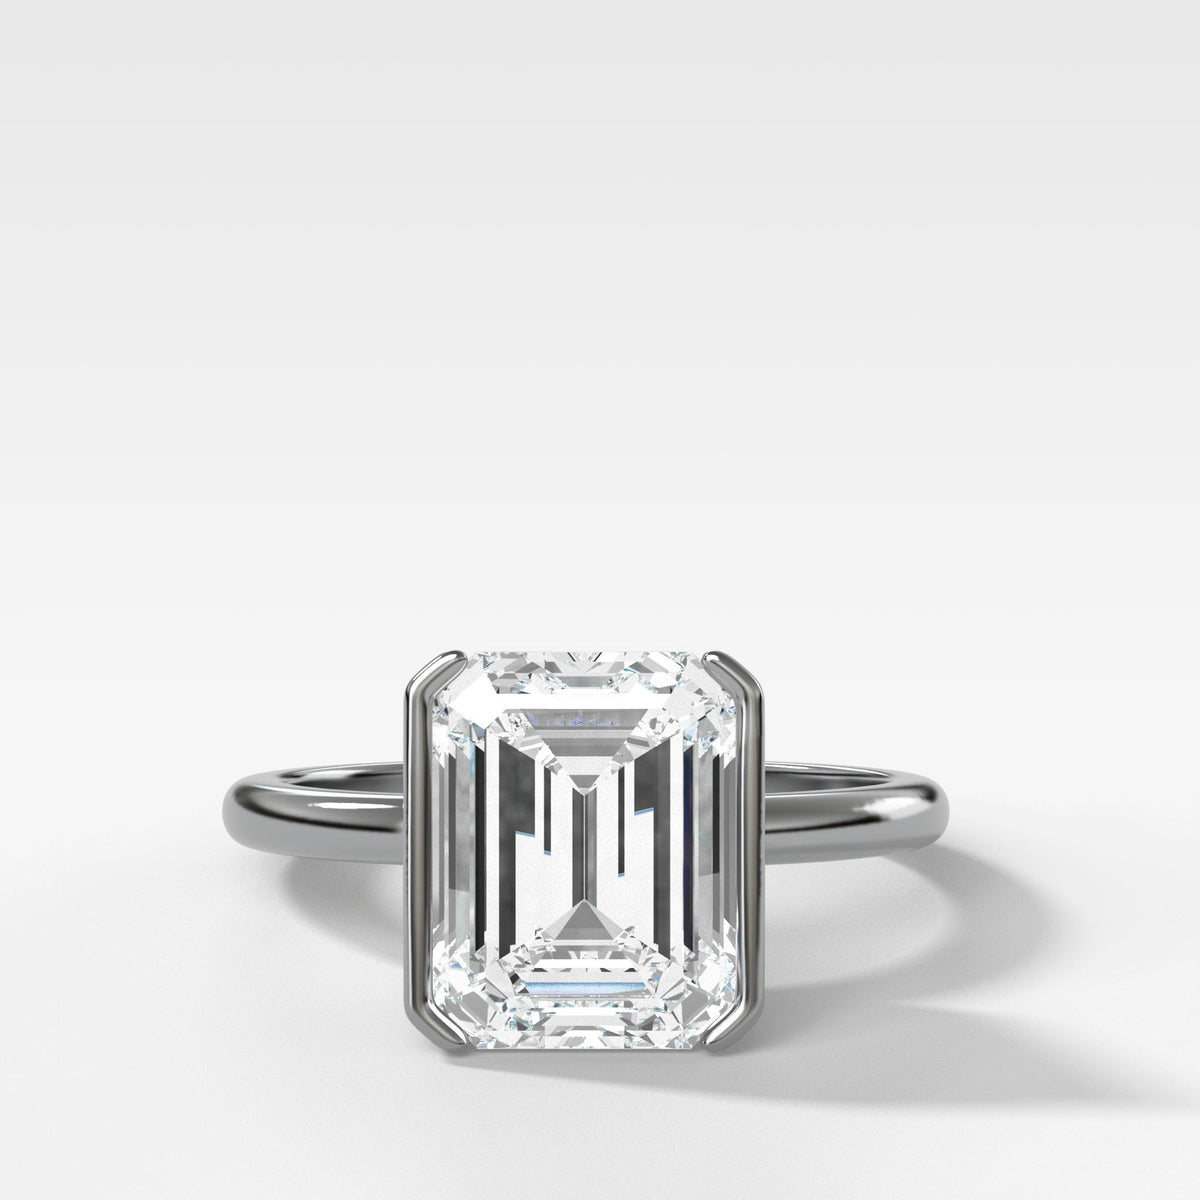 North South Half Bezel Solitaire Engagement Ring With Emerald Cut by Good Stone in White Gold